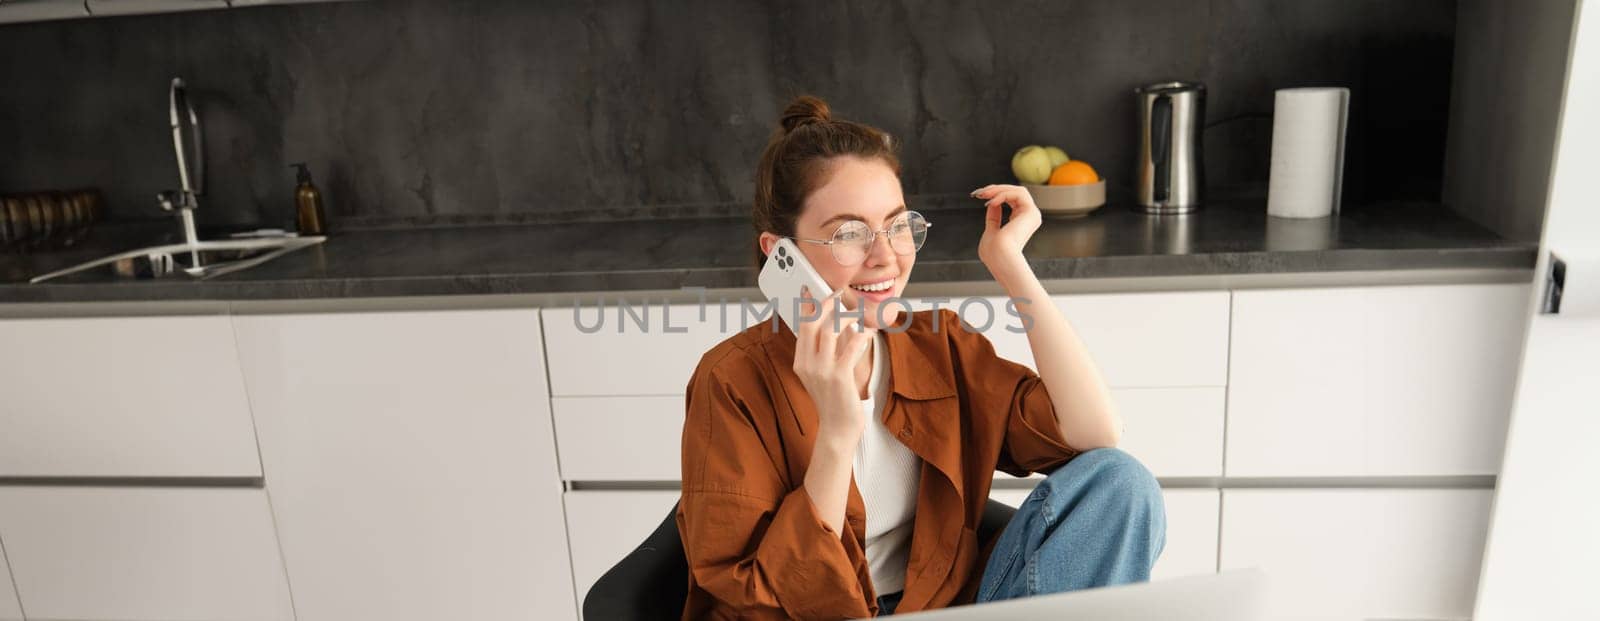 Excited young woman talking on mobile phone in front of laptop, sitting in kitchen with happy face expression, having a conversation.